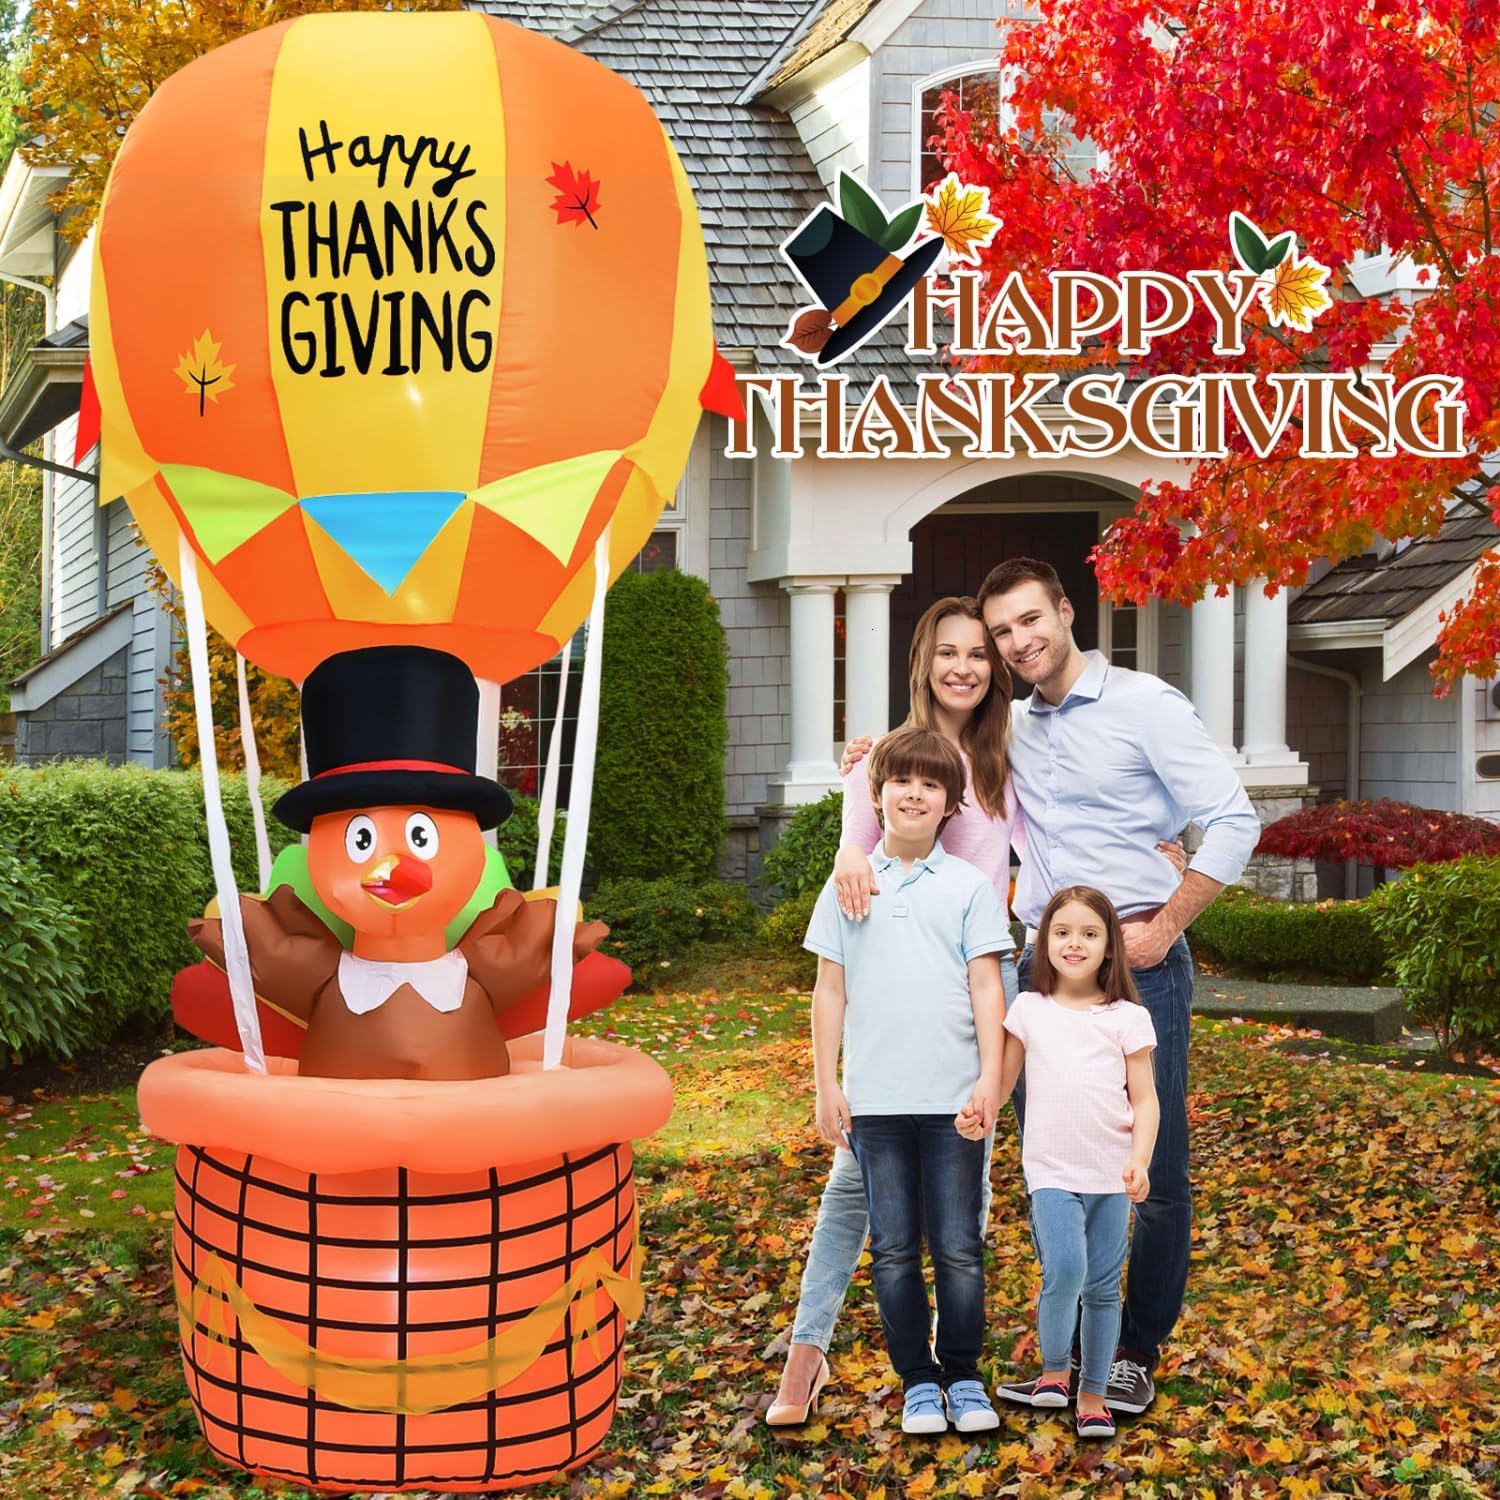 JETEHO 7 Ft Happy Thanksgiving Inflatable Turkey Riding in a Hot Air Balloons, Giant Thanksgiving Blow up Yard Decorations, Lighted Outdoor Thanksgiving Decor for Lawn, Front Yard